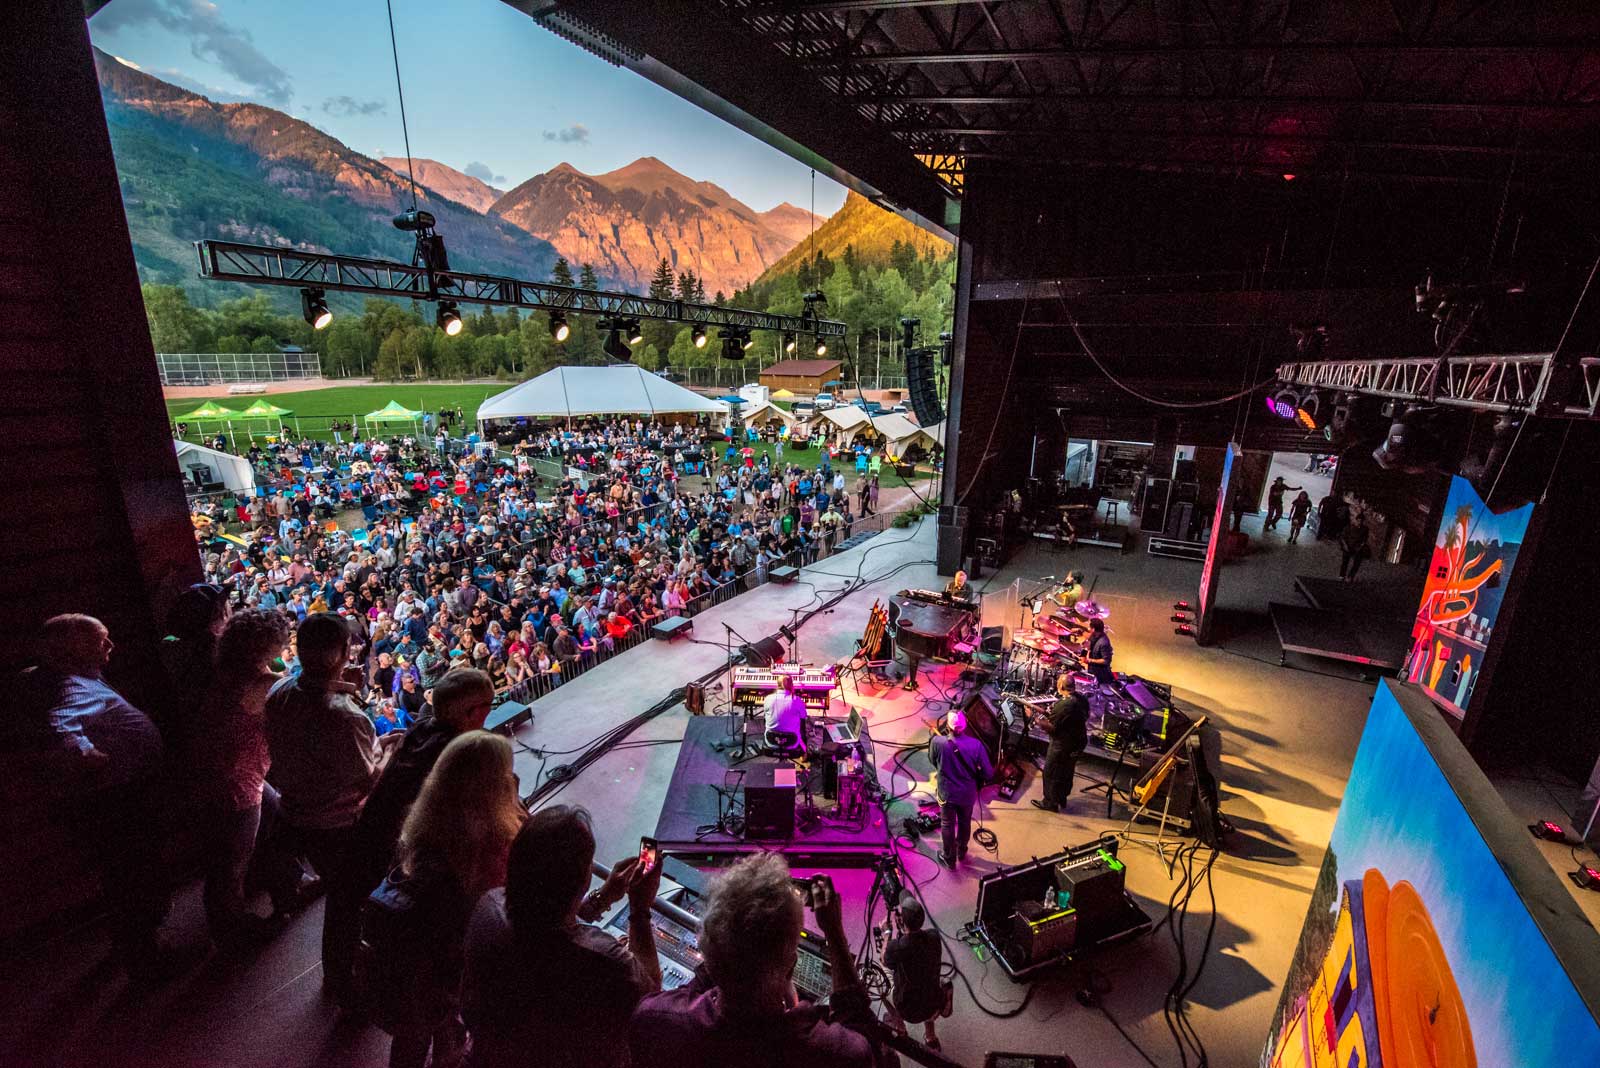  Sky Deck - Watch your favorite performance from a on-stage viewing platform of the Main Stage offering the most intimate festival experience possible. (pictured here from the Telluride Jazz Festival) 